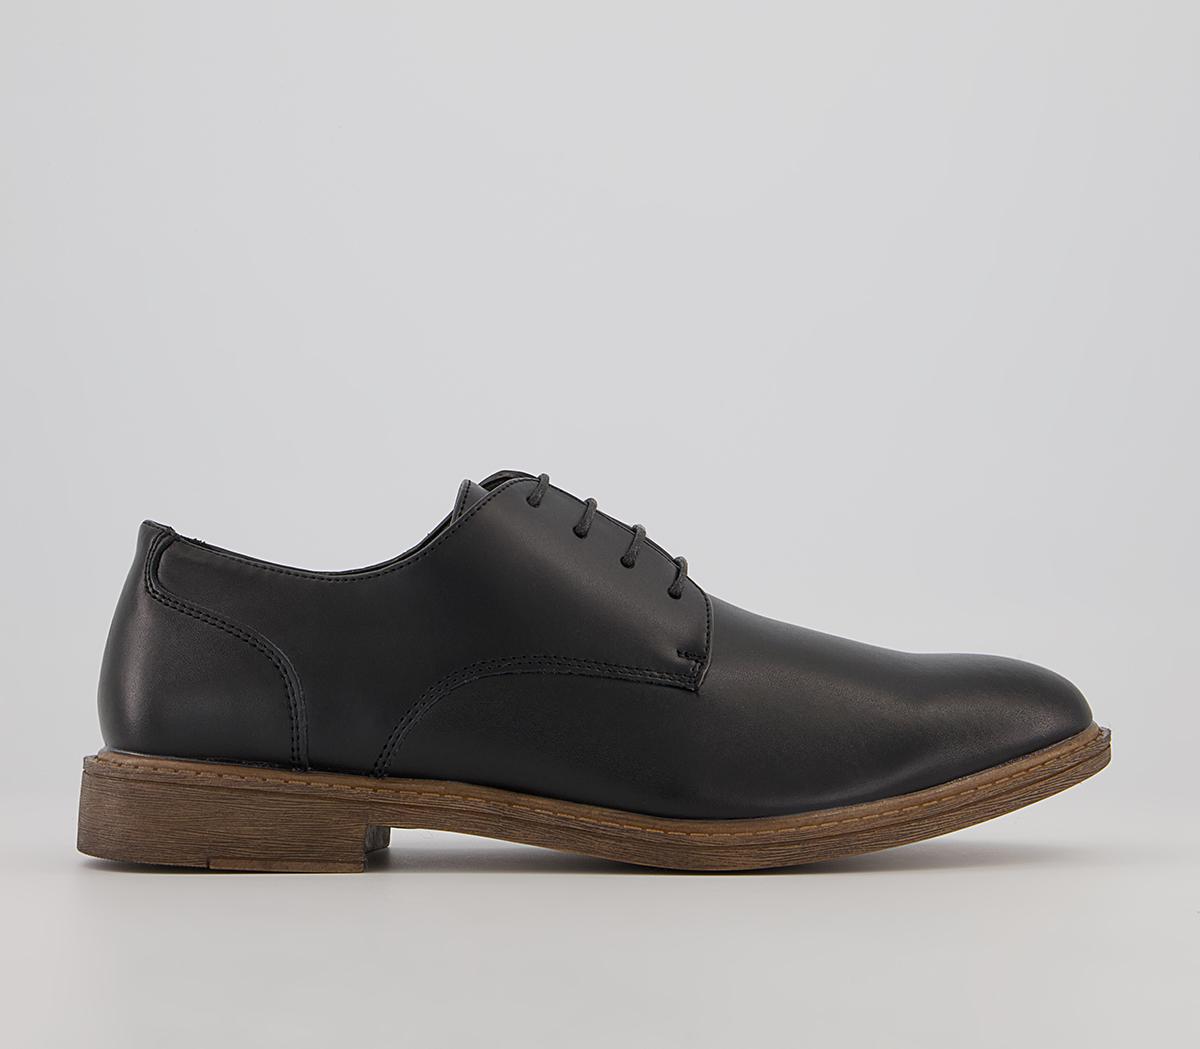 OFFICECurton Smart Casual Derby ShoesBlack Leather